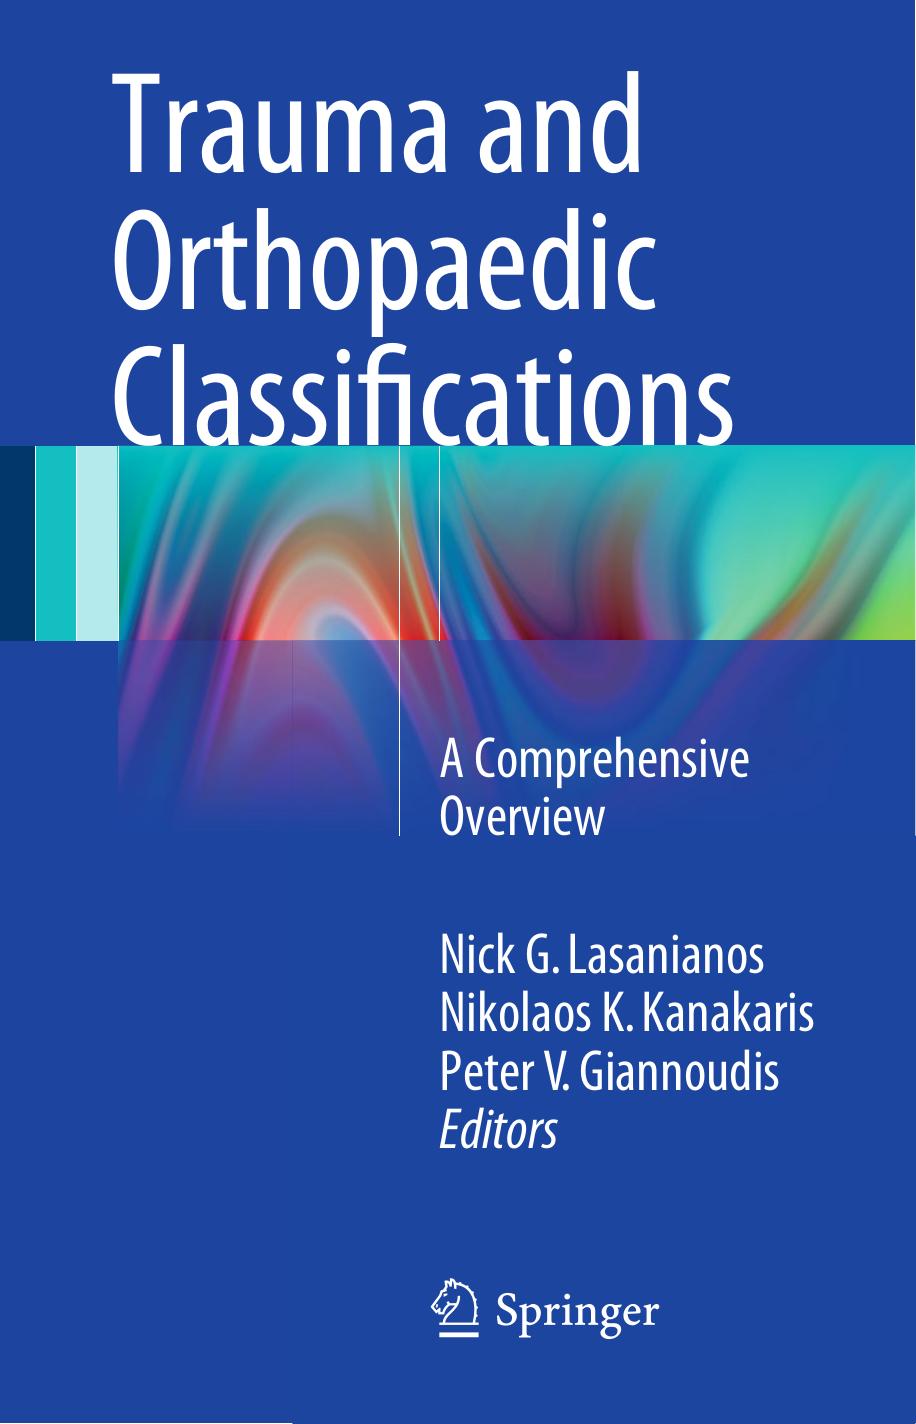 Trauma and Orthopaedic Classifications  A Comprehensive Overview (2015)